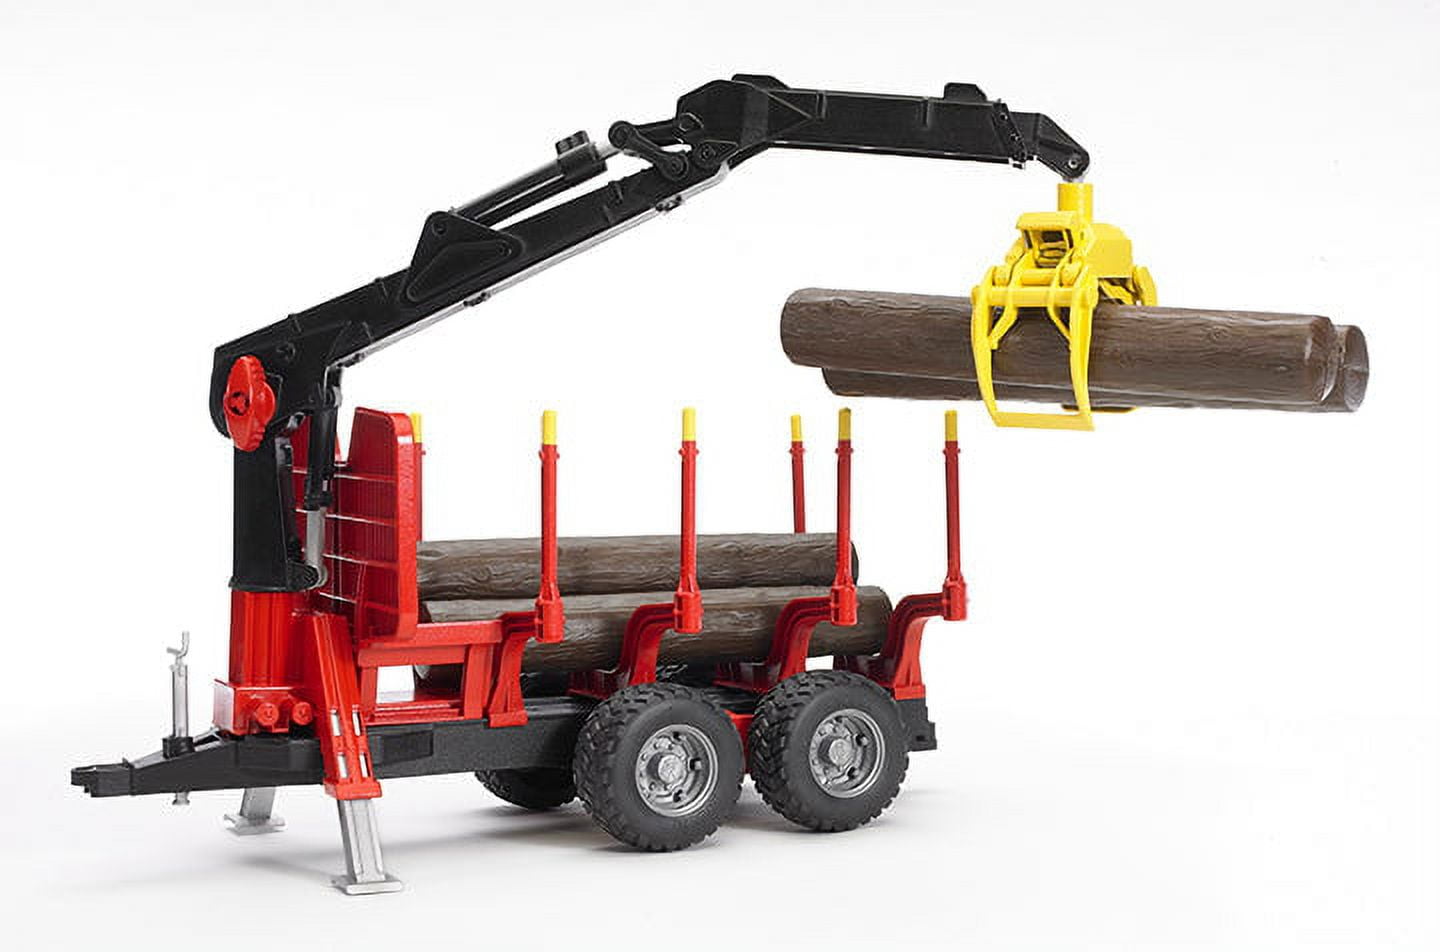 Bruder 02252 Forestry Trailer with Crane, Grapple and 4 Logs